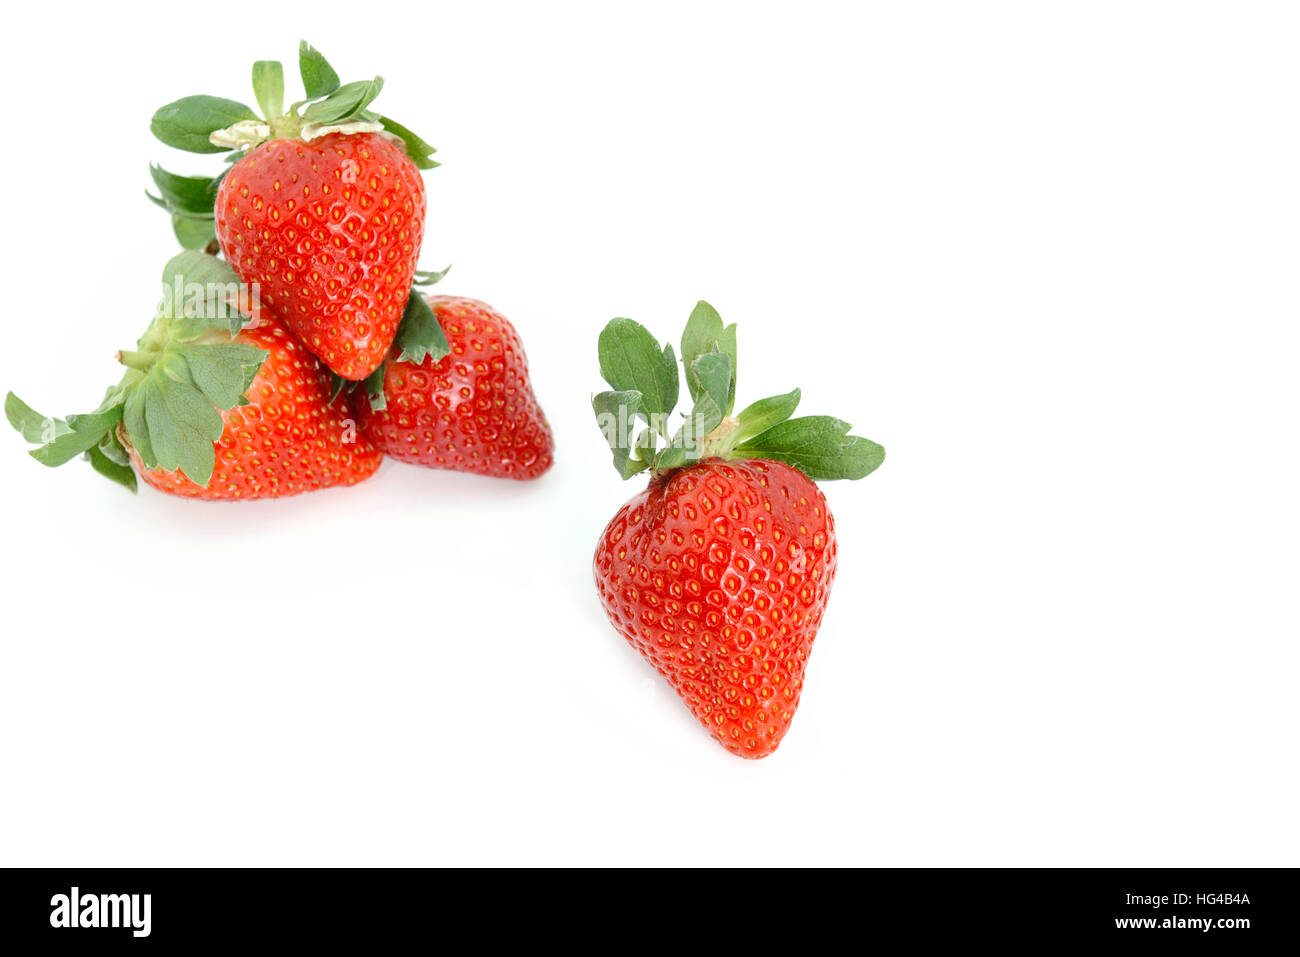 Fresh Strawberries on white background. Piling up and arranging in order. Stock Photo